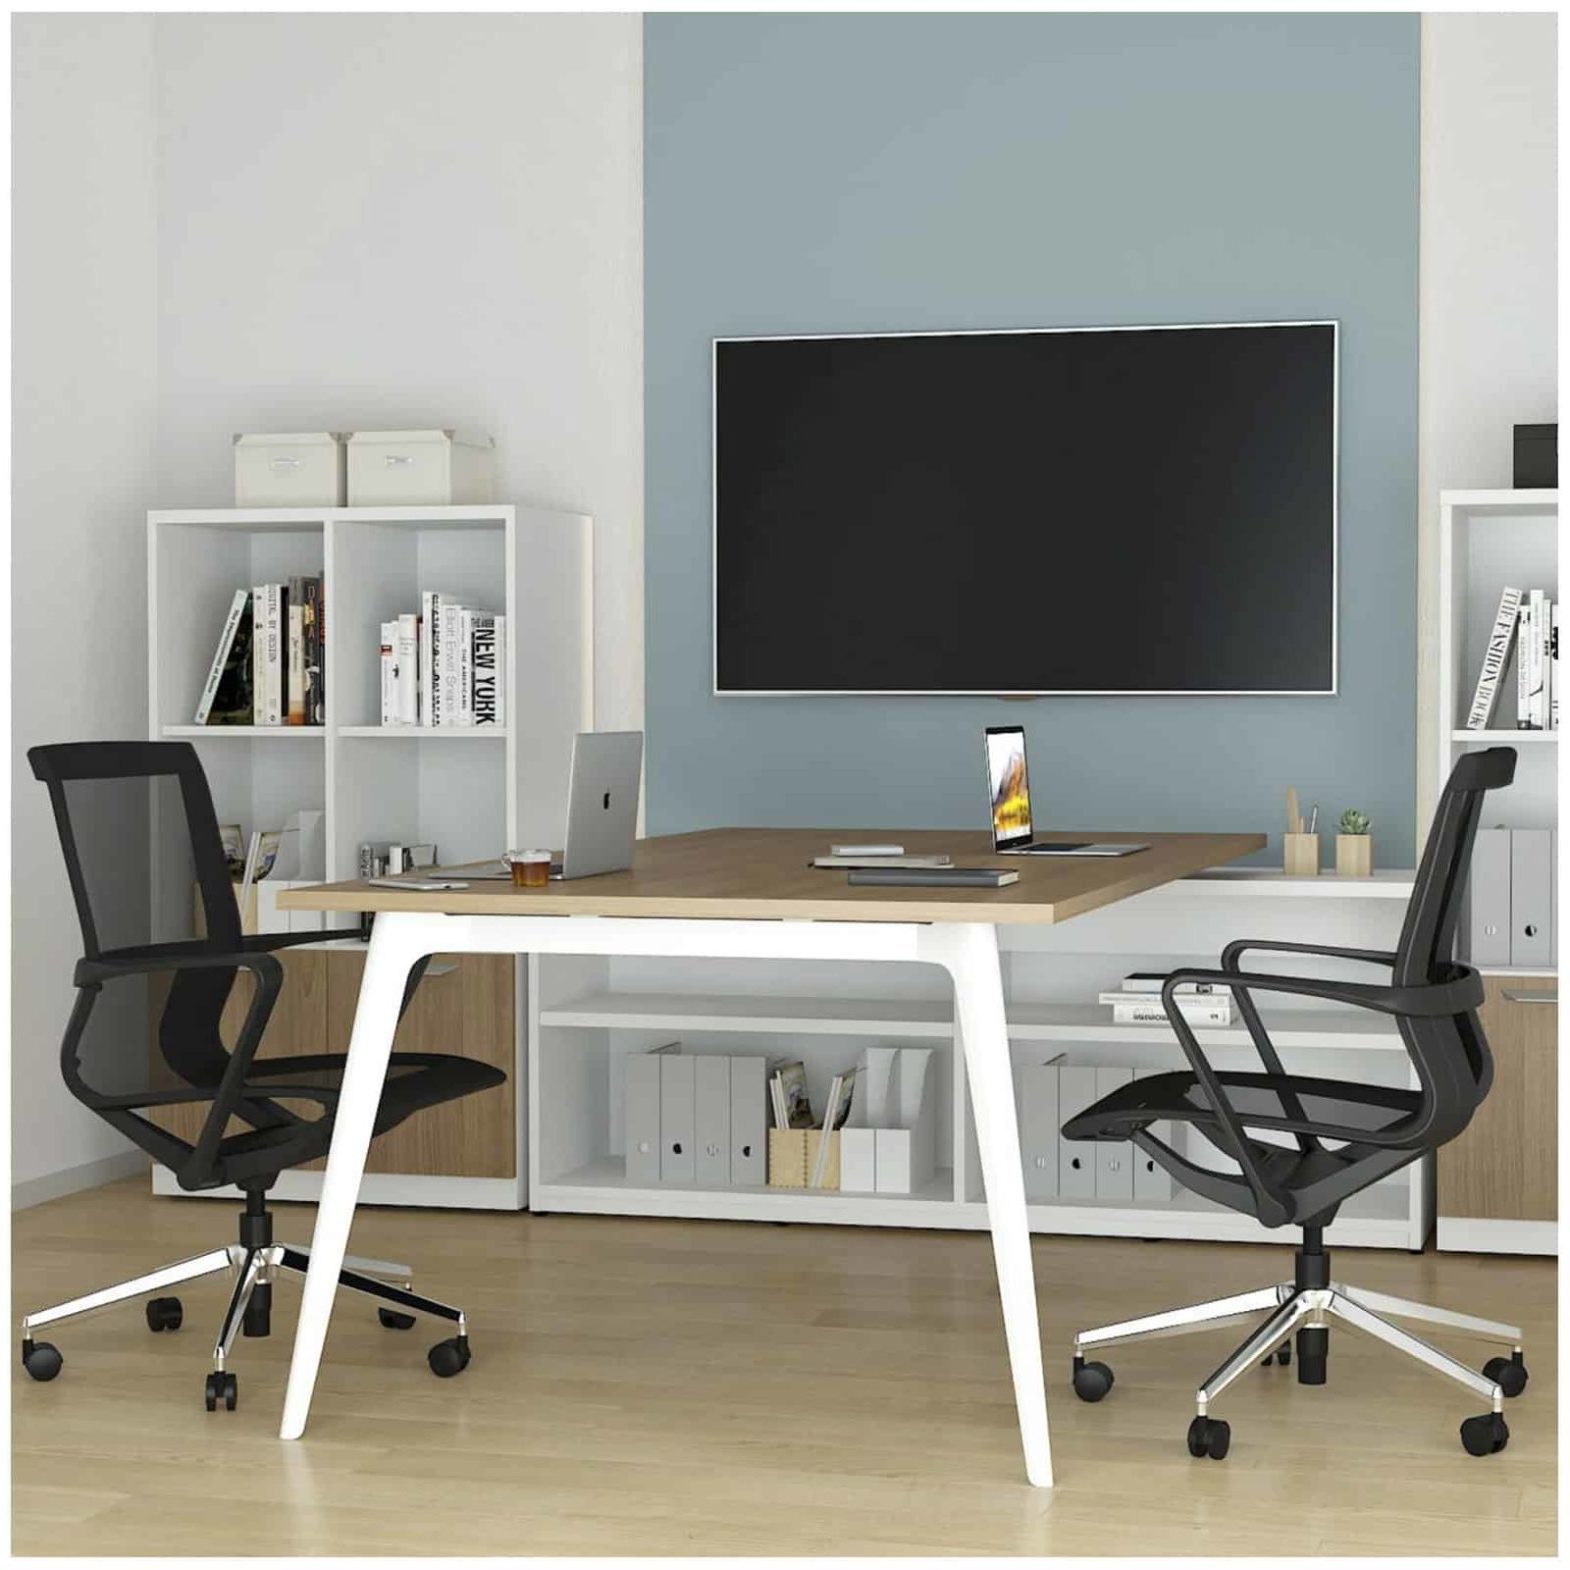 Dash is a modern line with a contemporary look that features mix and match components that are perfect for Private Offices, Open Workspaces, Conference Rooms, Collaboration Spaces, Storage Solutions, and more!